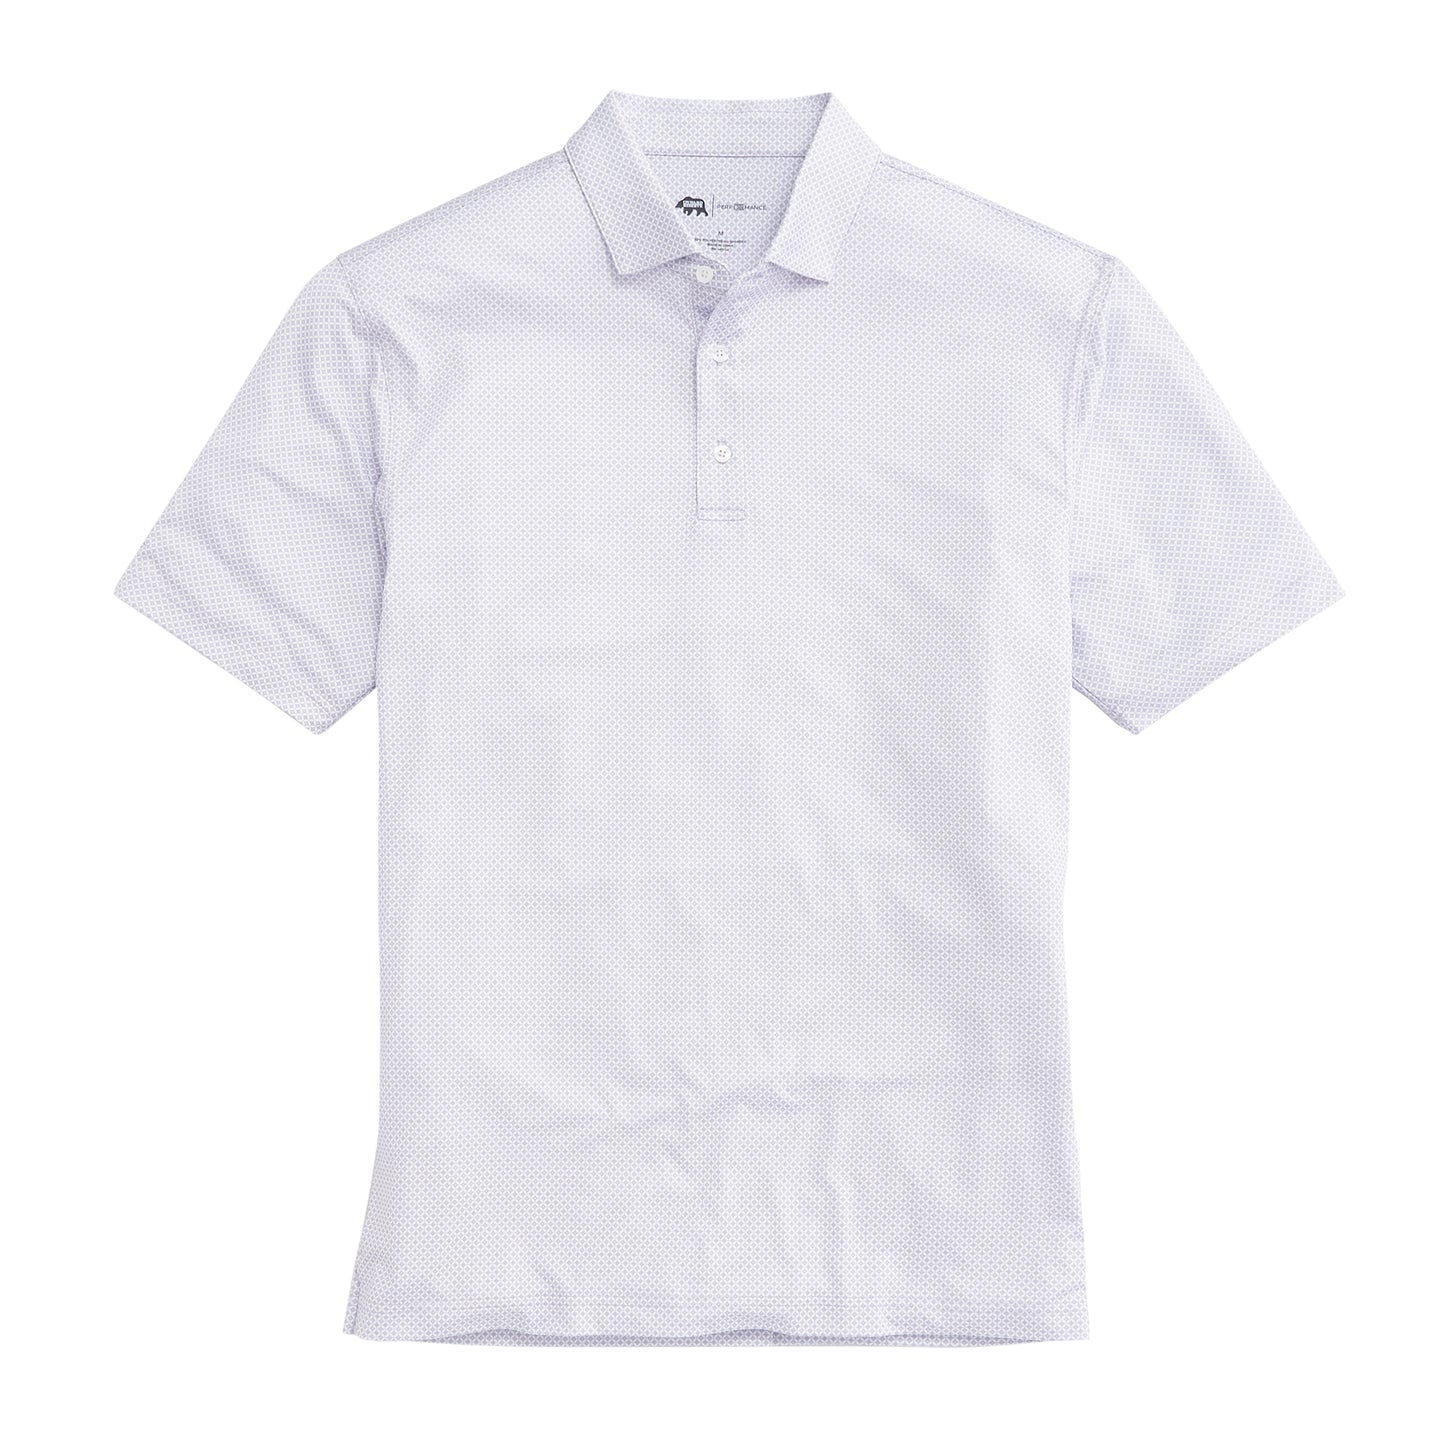 Scope Printed Performance Polo